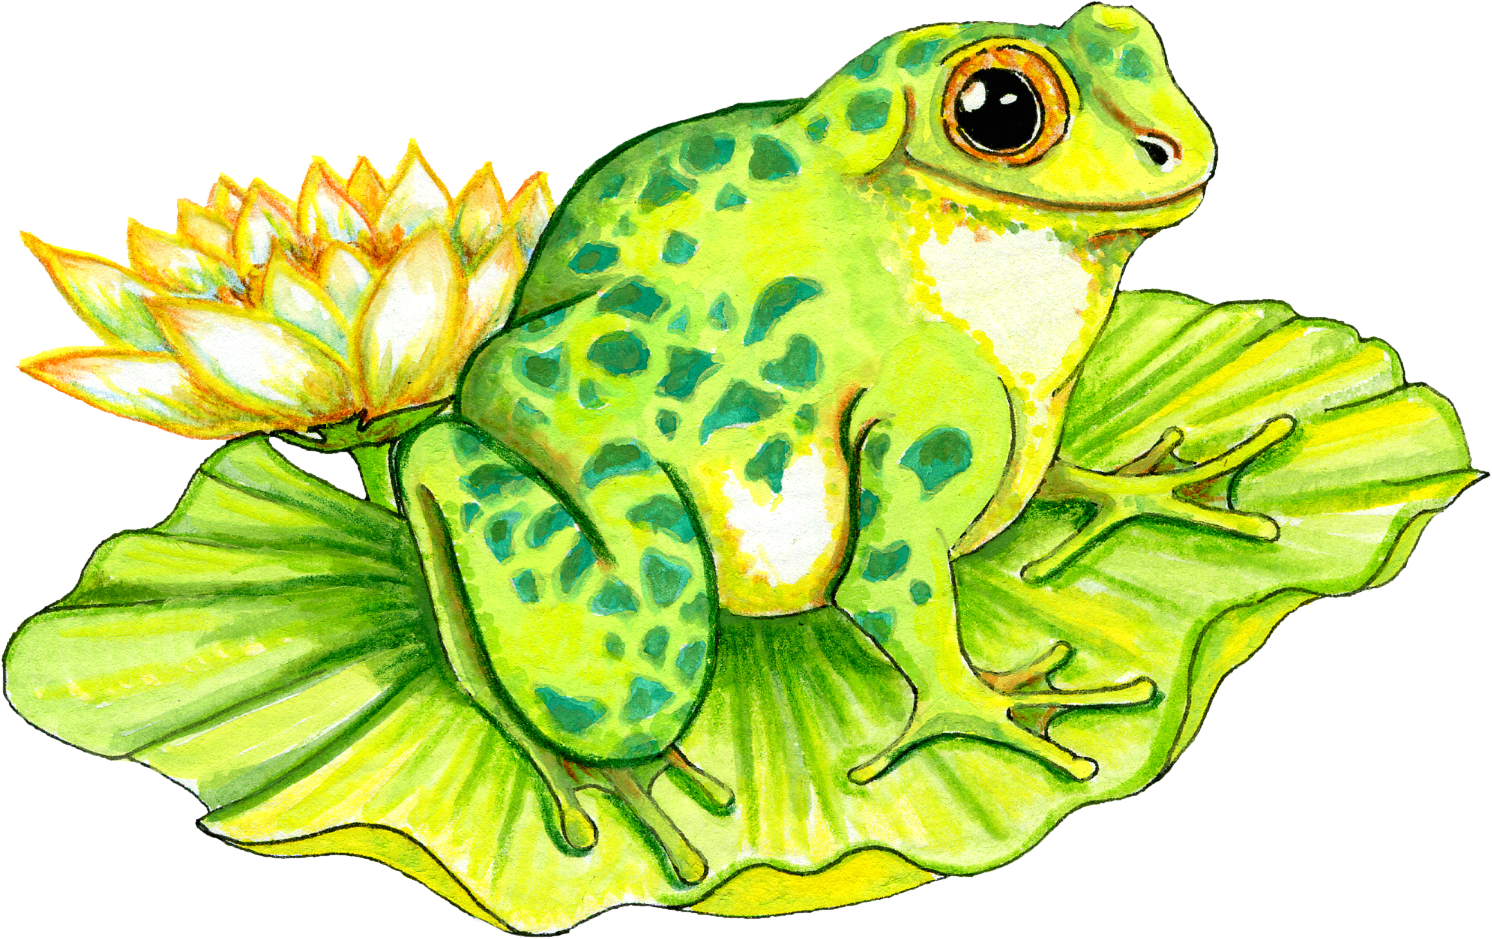 Cartoon Frog On A Lily Pad Ca